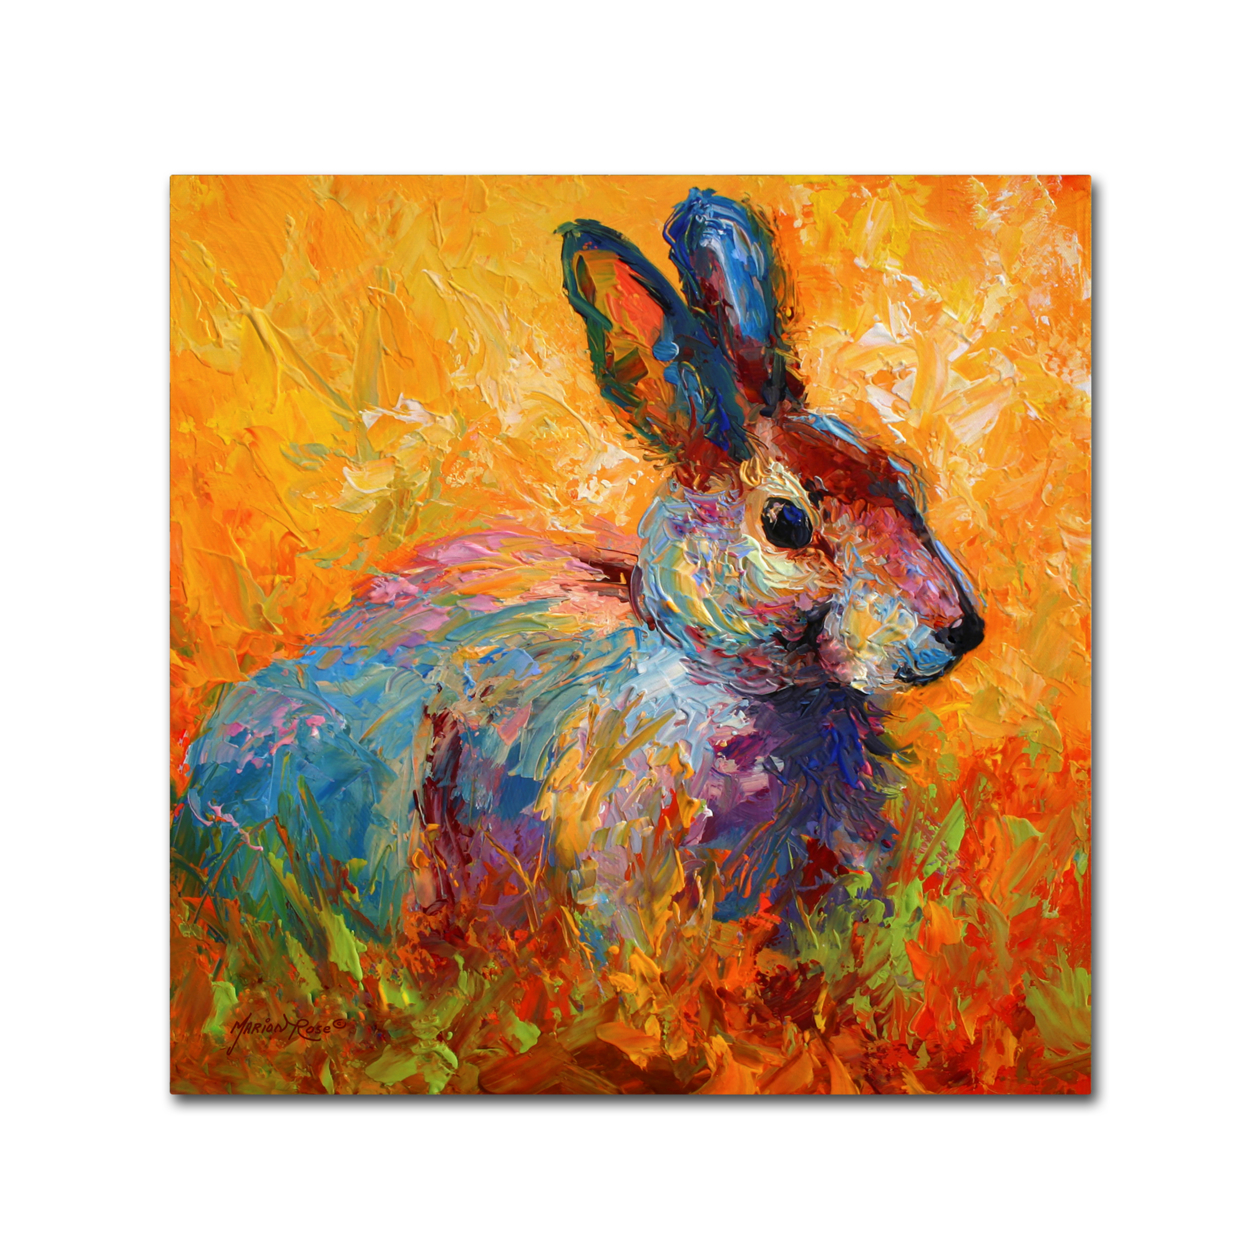 Marion Rose 'Bunny IV' Ready To Hang Canvas Art 14 X 14 Inches Made In USA